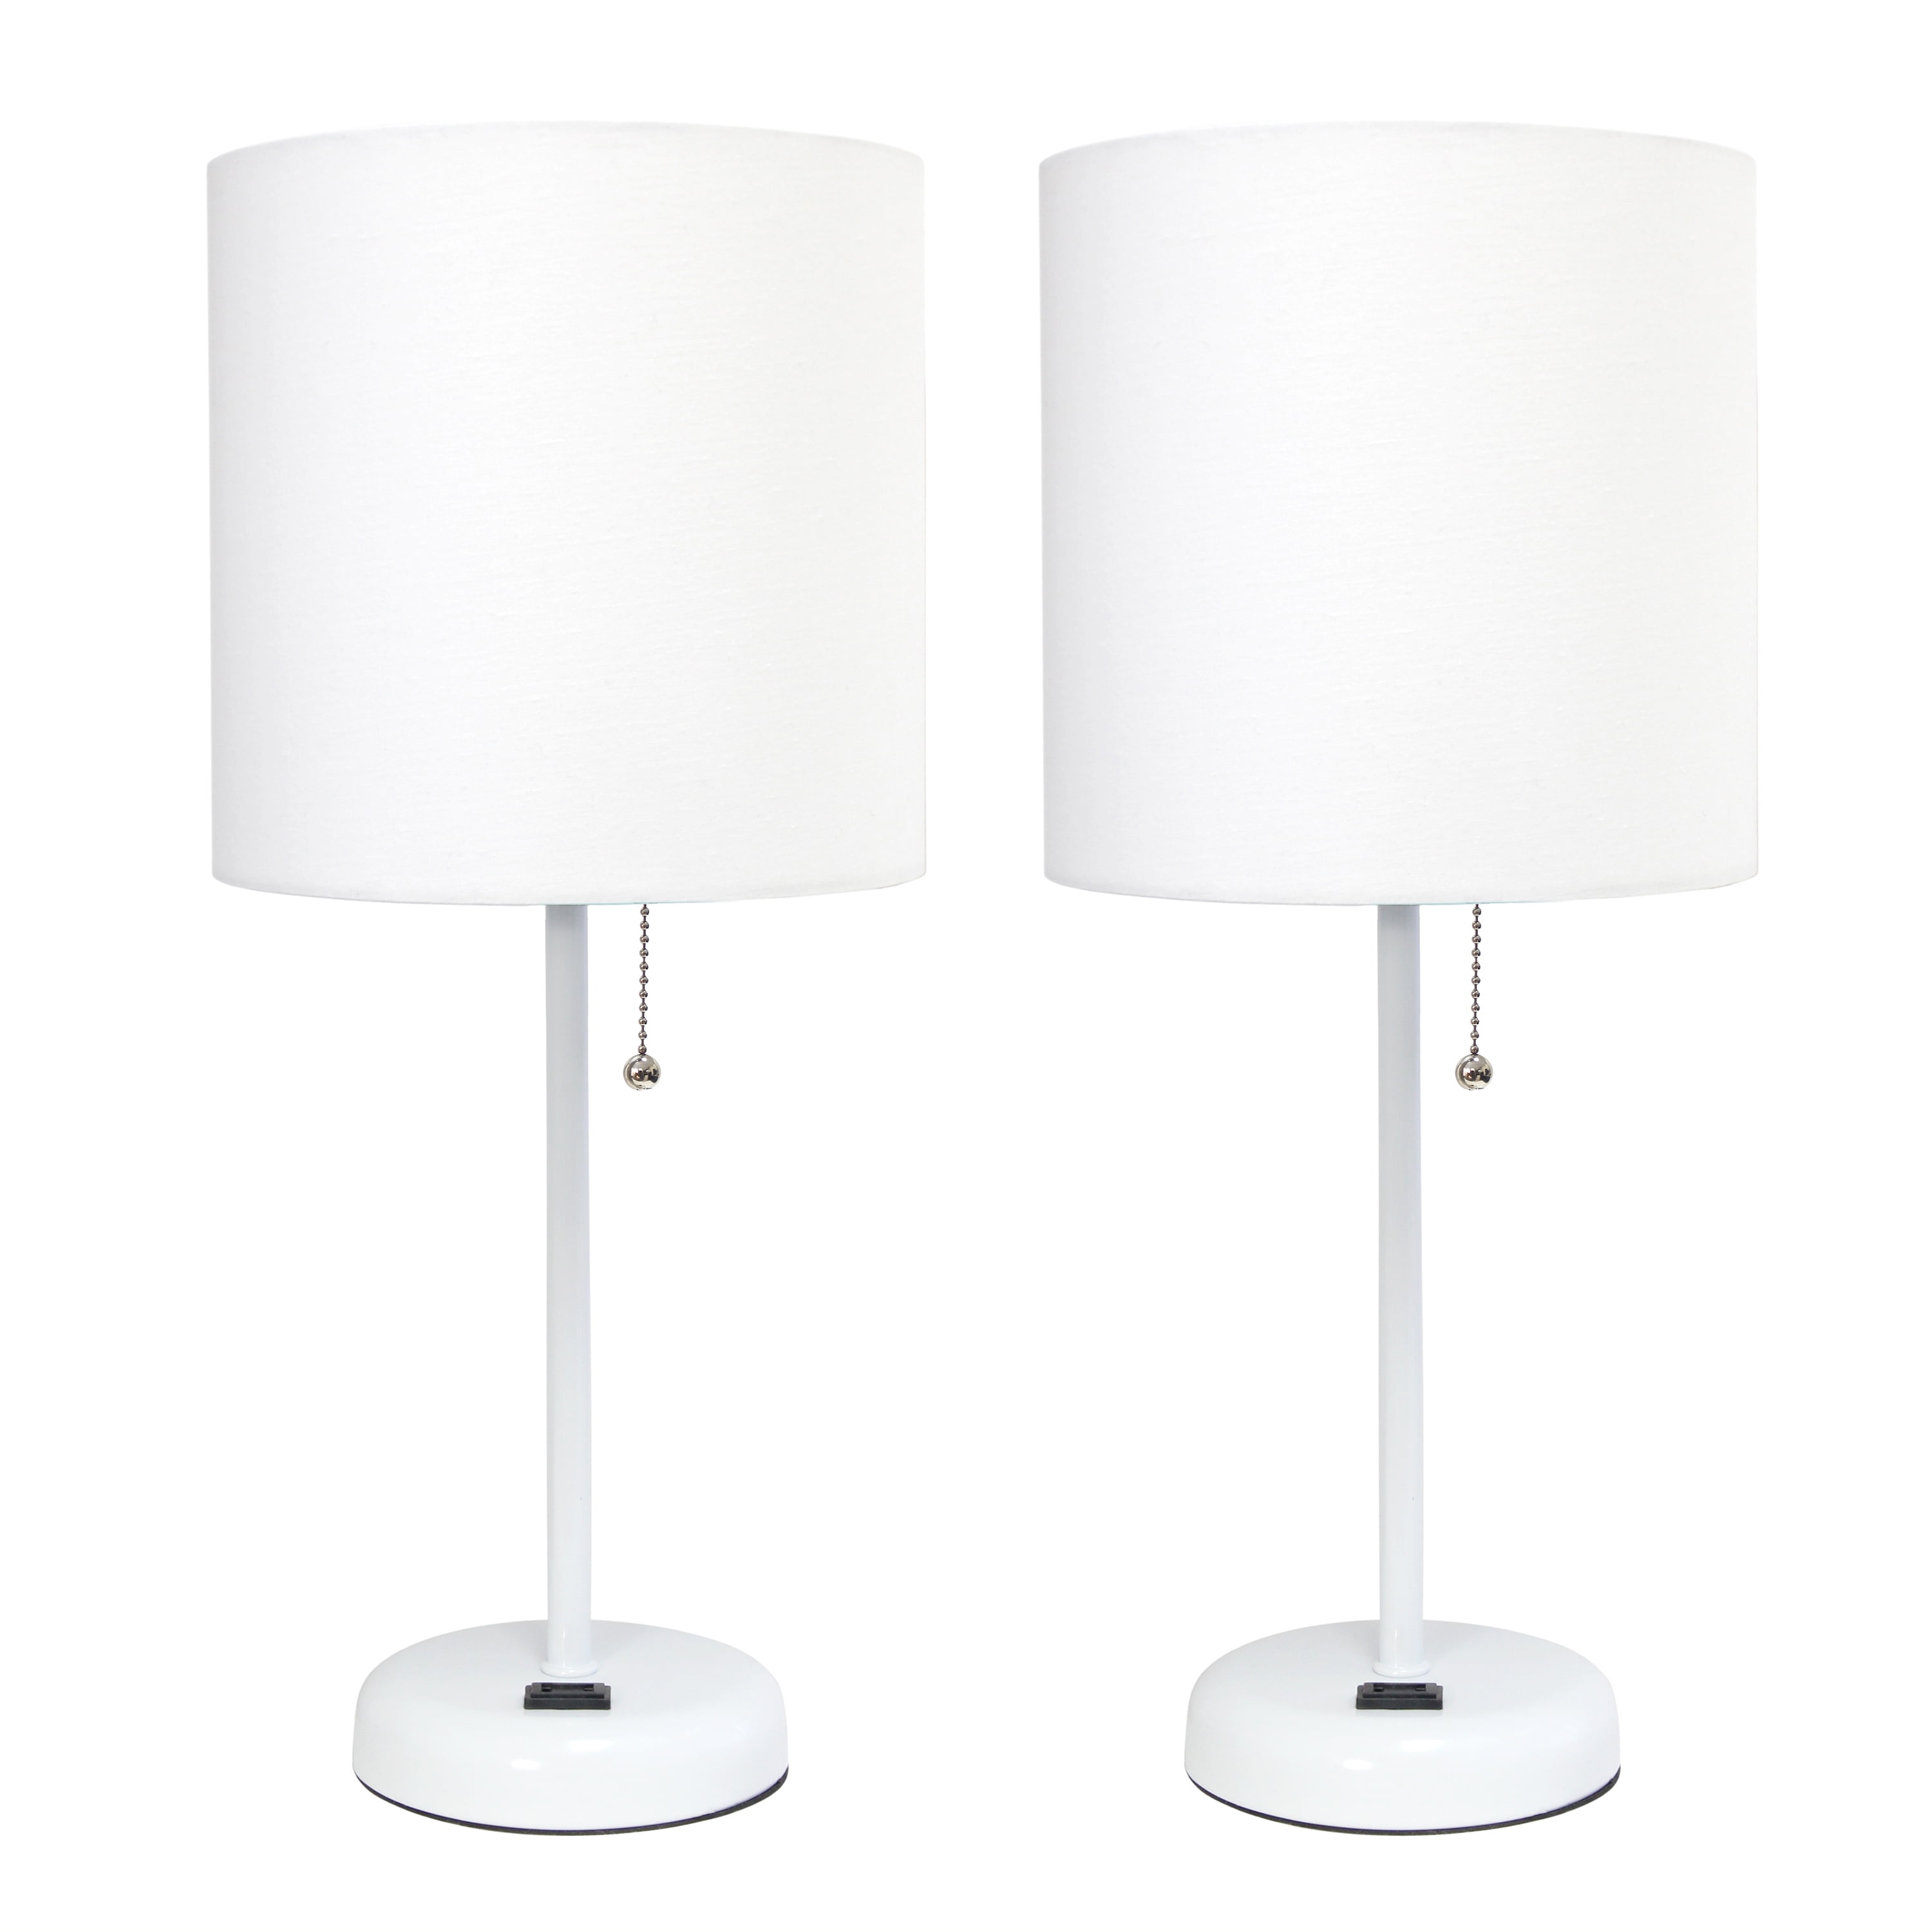 Lc2001-wow-2pk White Stick Table Lamp With Charging Outlet & Fabric Shade, White - Set Of 2